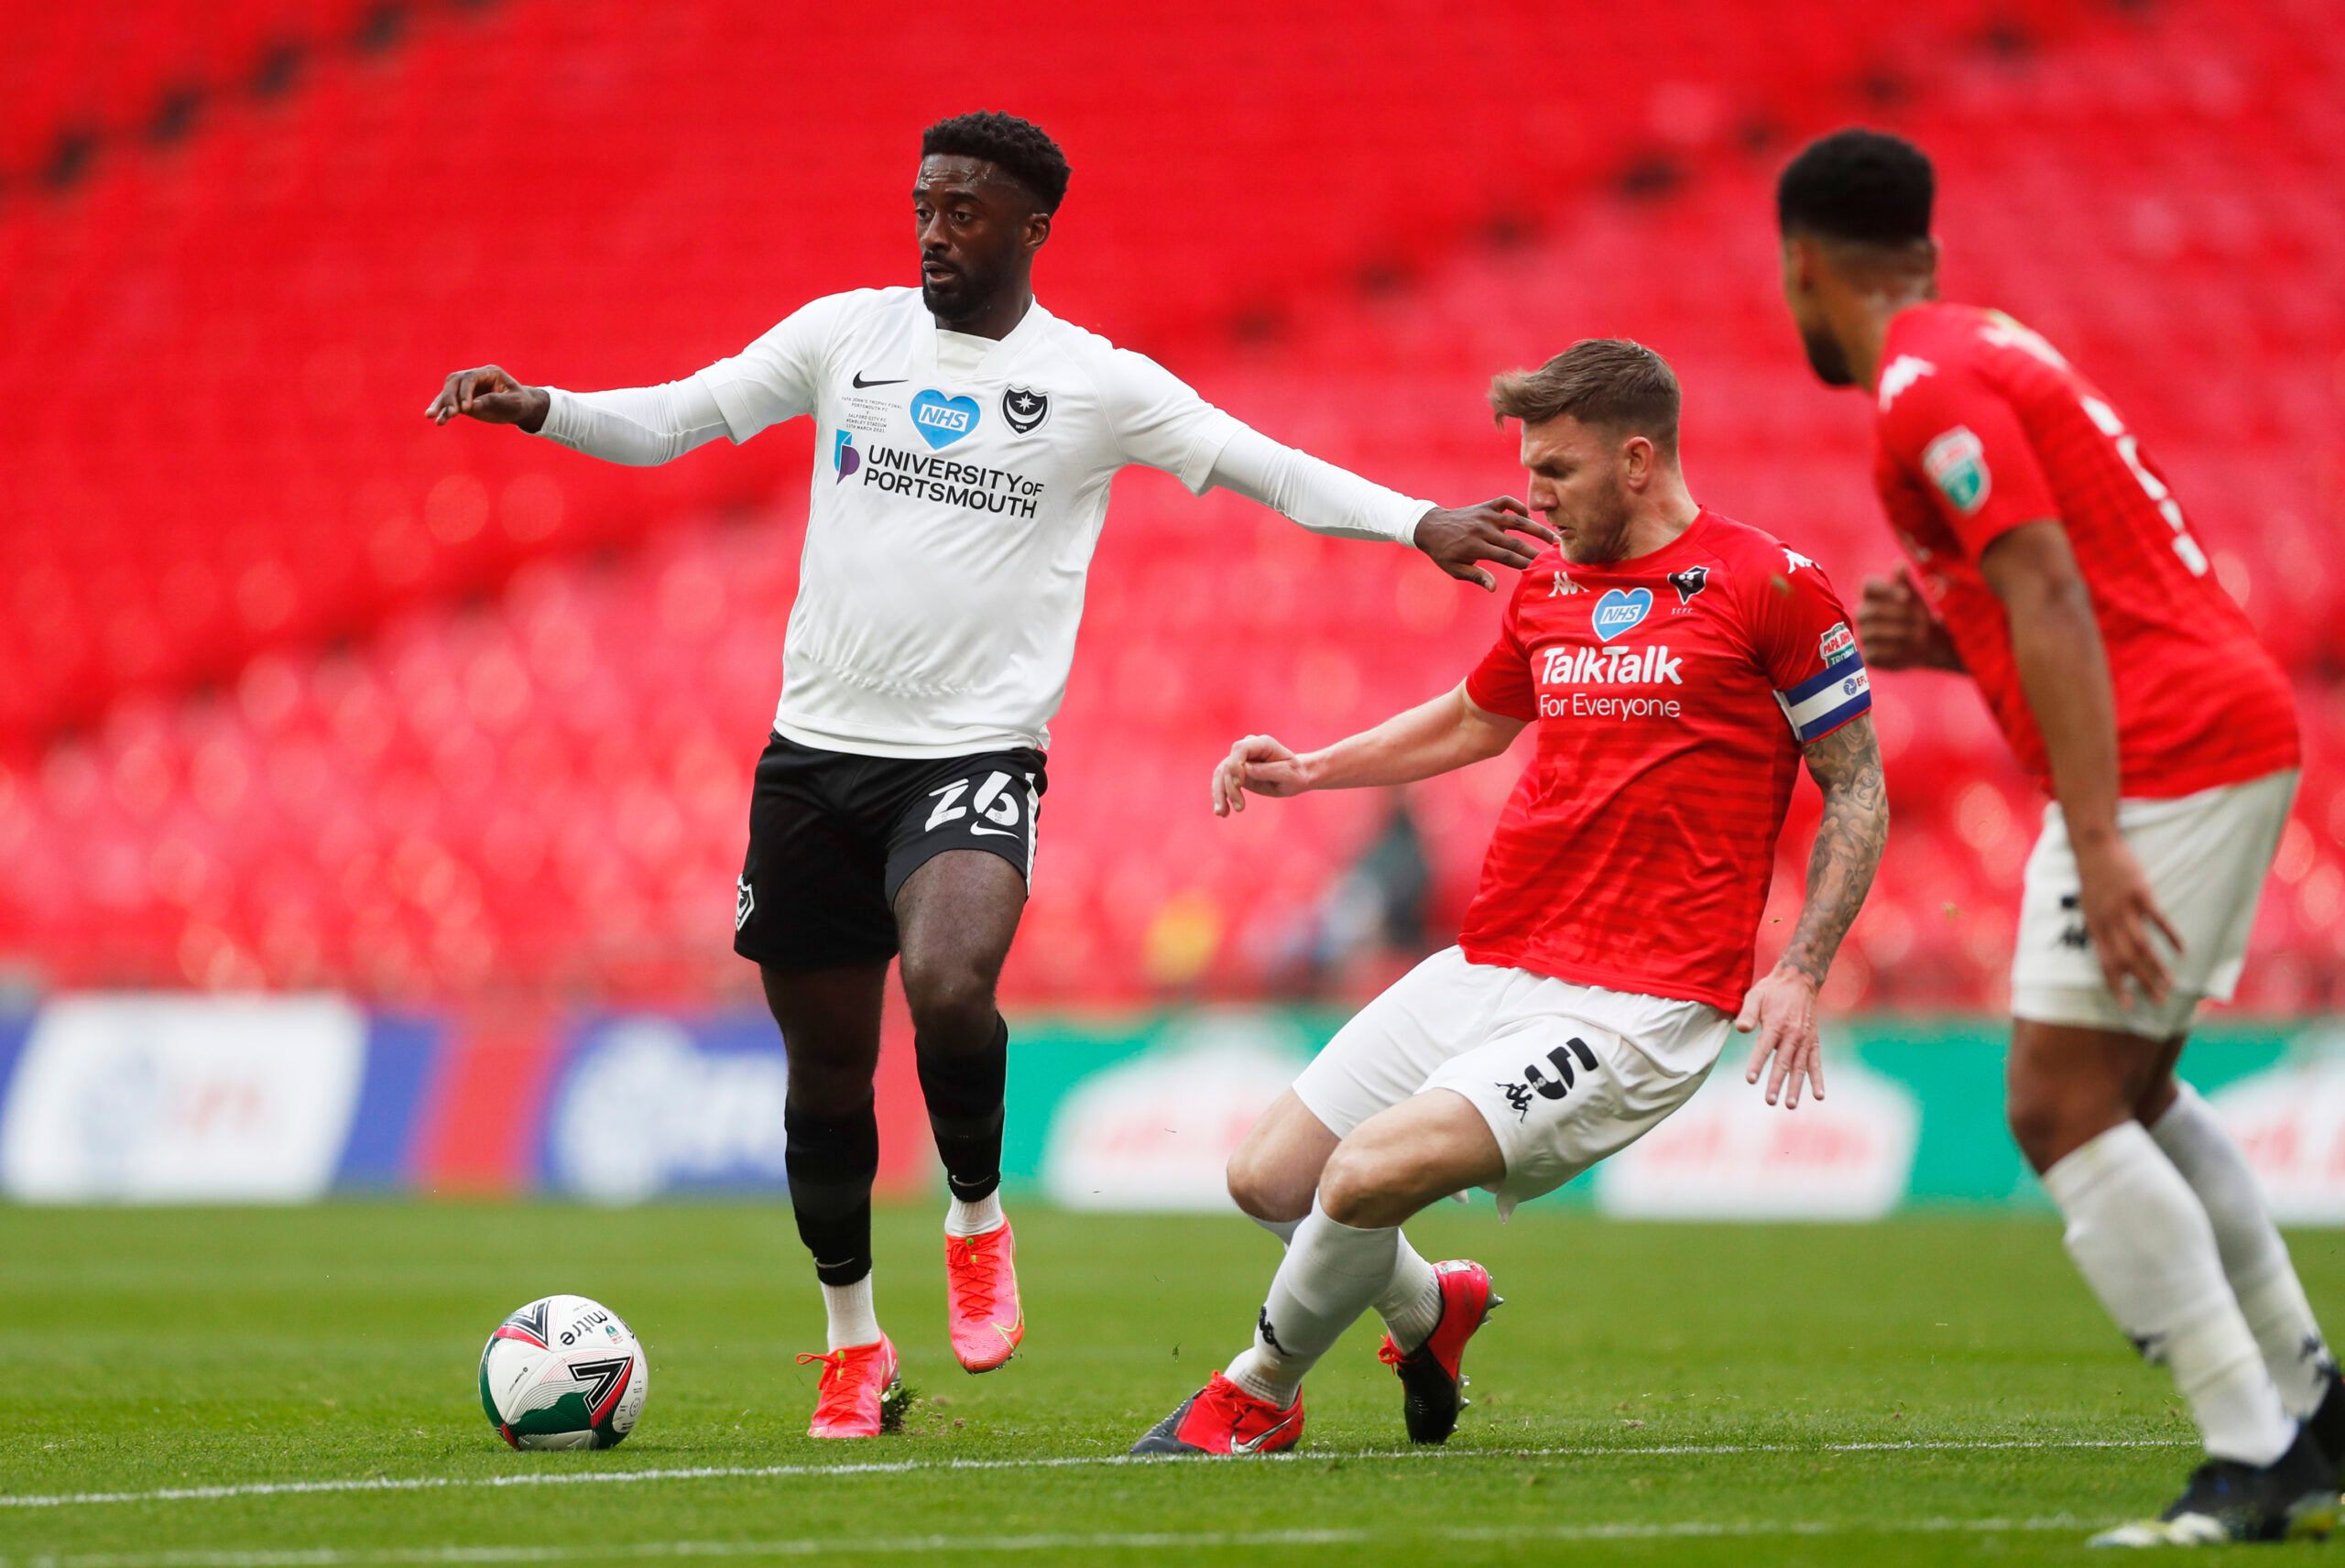 Soccer Football - 2019/20 EFL Trophy Final - Portsmouth v Salford City - Wembley Stadium, London, Britain - March 13, 2021 Salford's Ashley Eastham in action with Portsmouth's Jordy Hiwula Action Images/Matthew Childs EDITORIAL USE ONLY. No use with unauthorized audio, video, data, fixture lists, club/league logos or 'live' services. Online in-match use limited to 75 images, no video emulation. No use in betting, games or single club /league/player publications.  Please contact your account repr